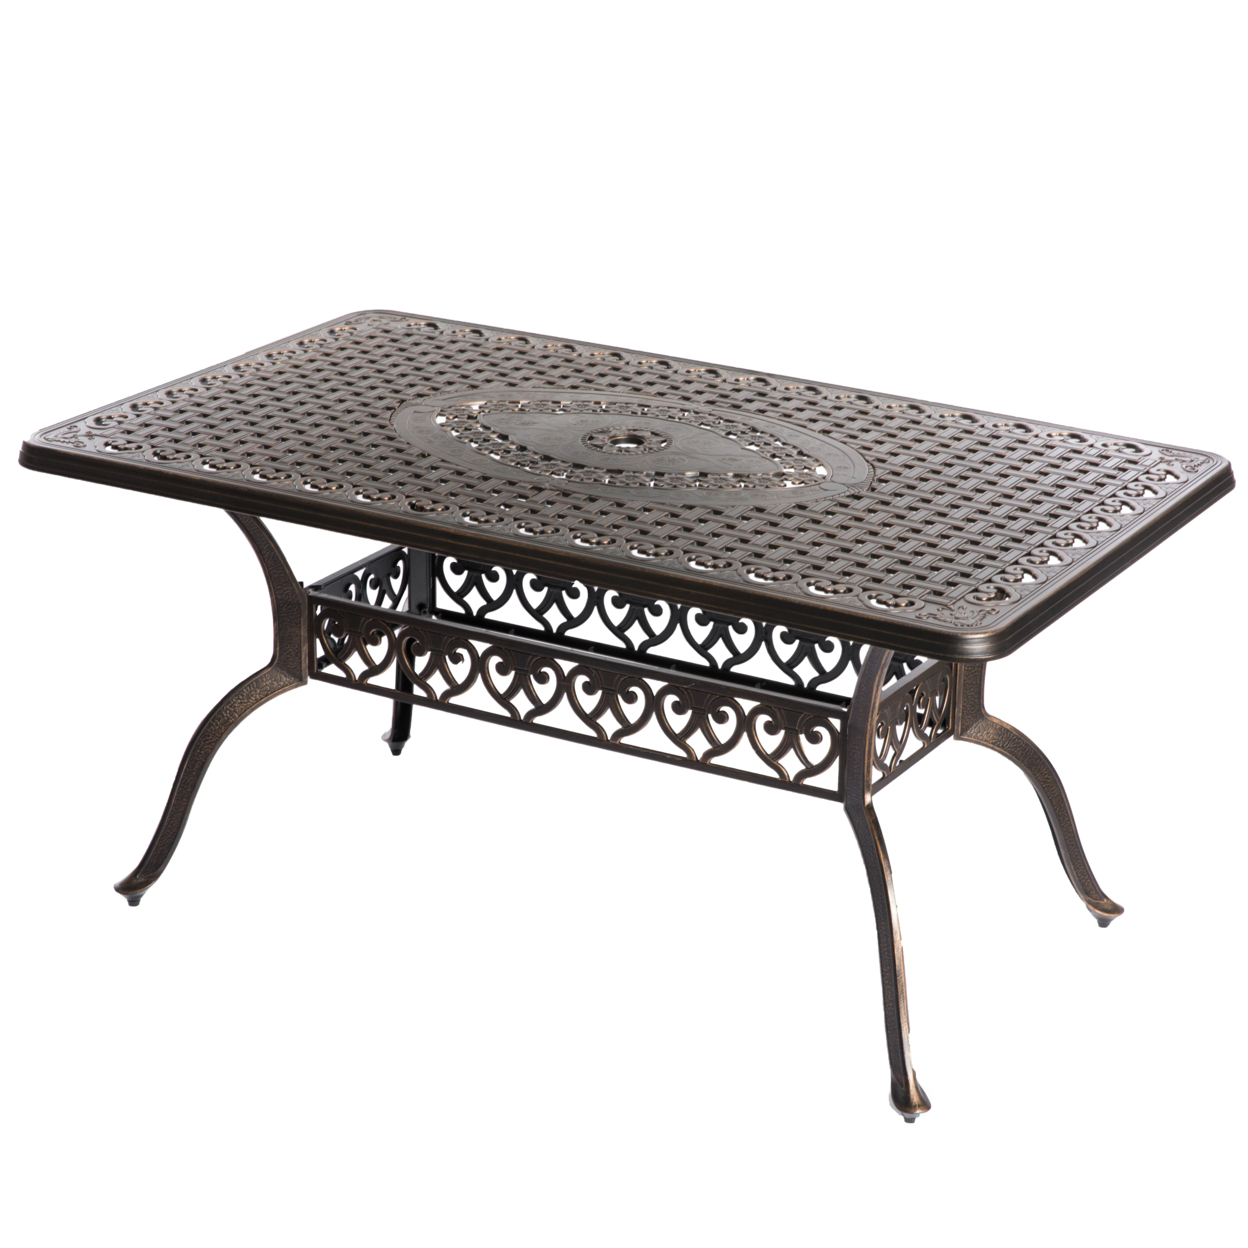 Indoor And Outdoor Bronze Dinning Set 2 Chairs With 1 Table Cast Aluminum. - Table